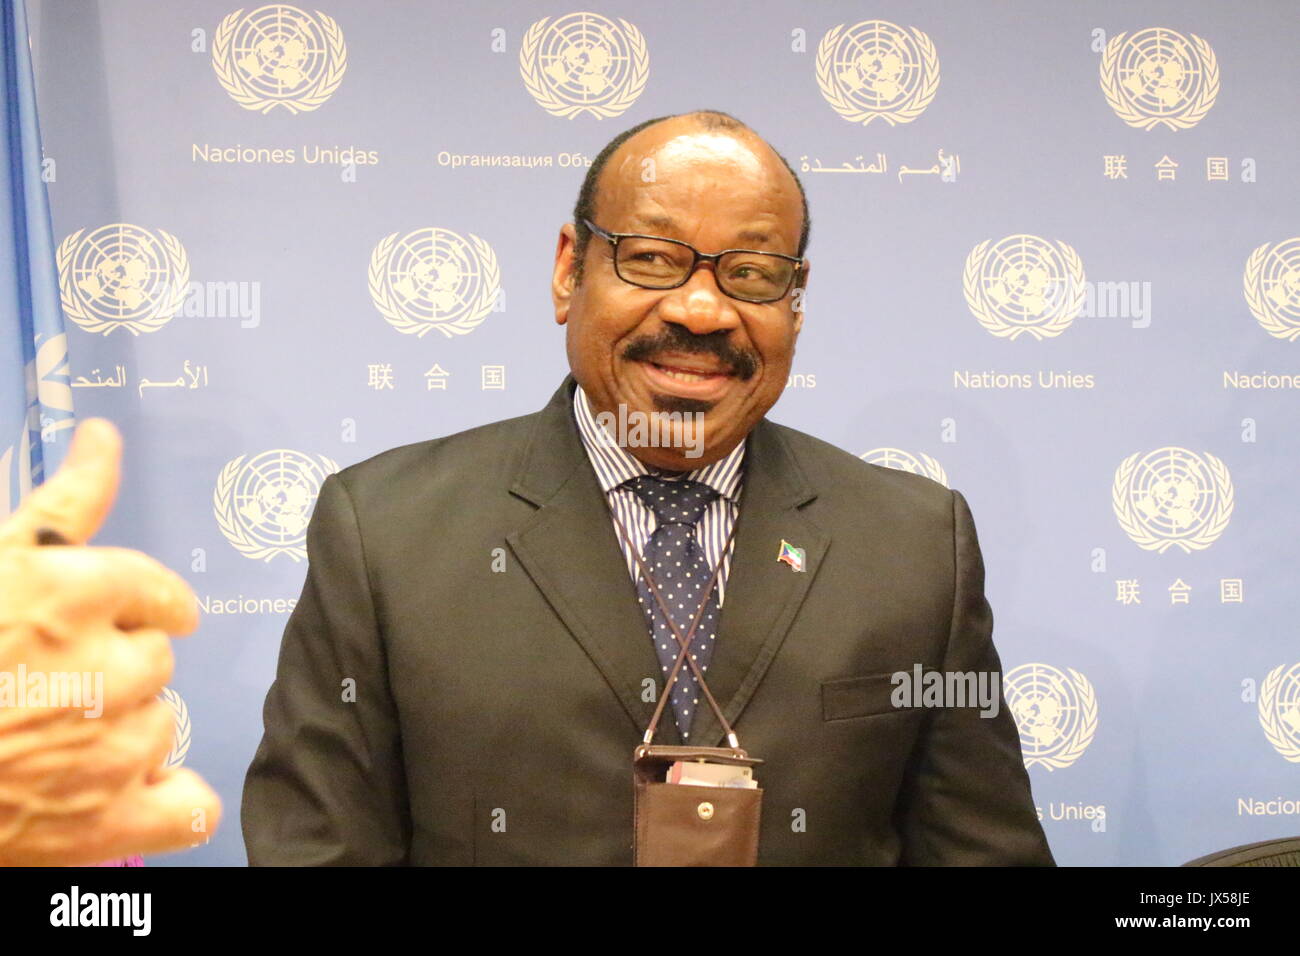 UN, New York, USA. 14th August, 2017. Equatorial Guinea Ambassador Ndong Mba criticized the embezzlement case in France against his Vice President Teodorin Obiang. Photo: Matthew Russell Lee / Inner City Press/Alamy Live News Stock Photo